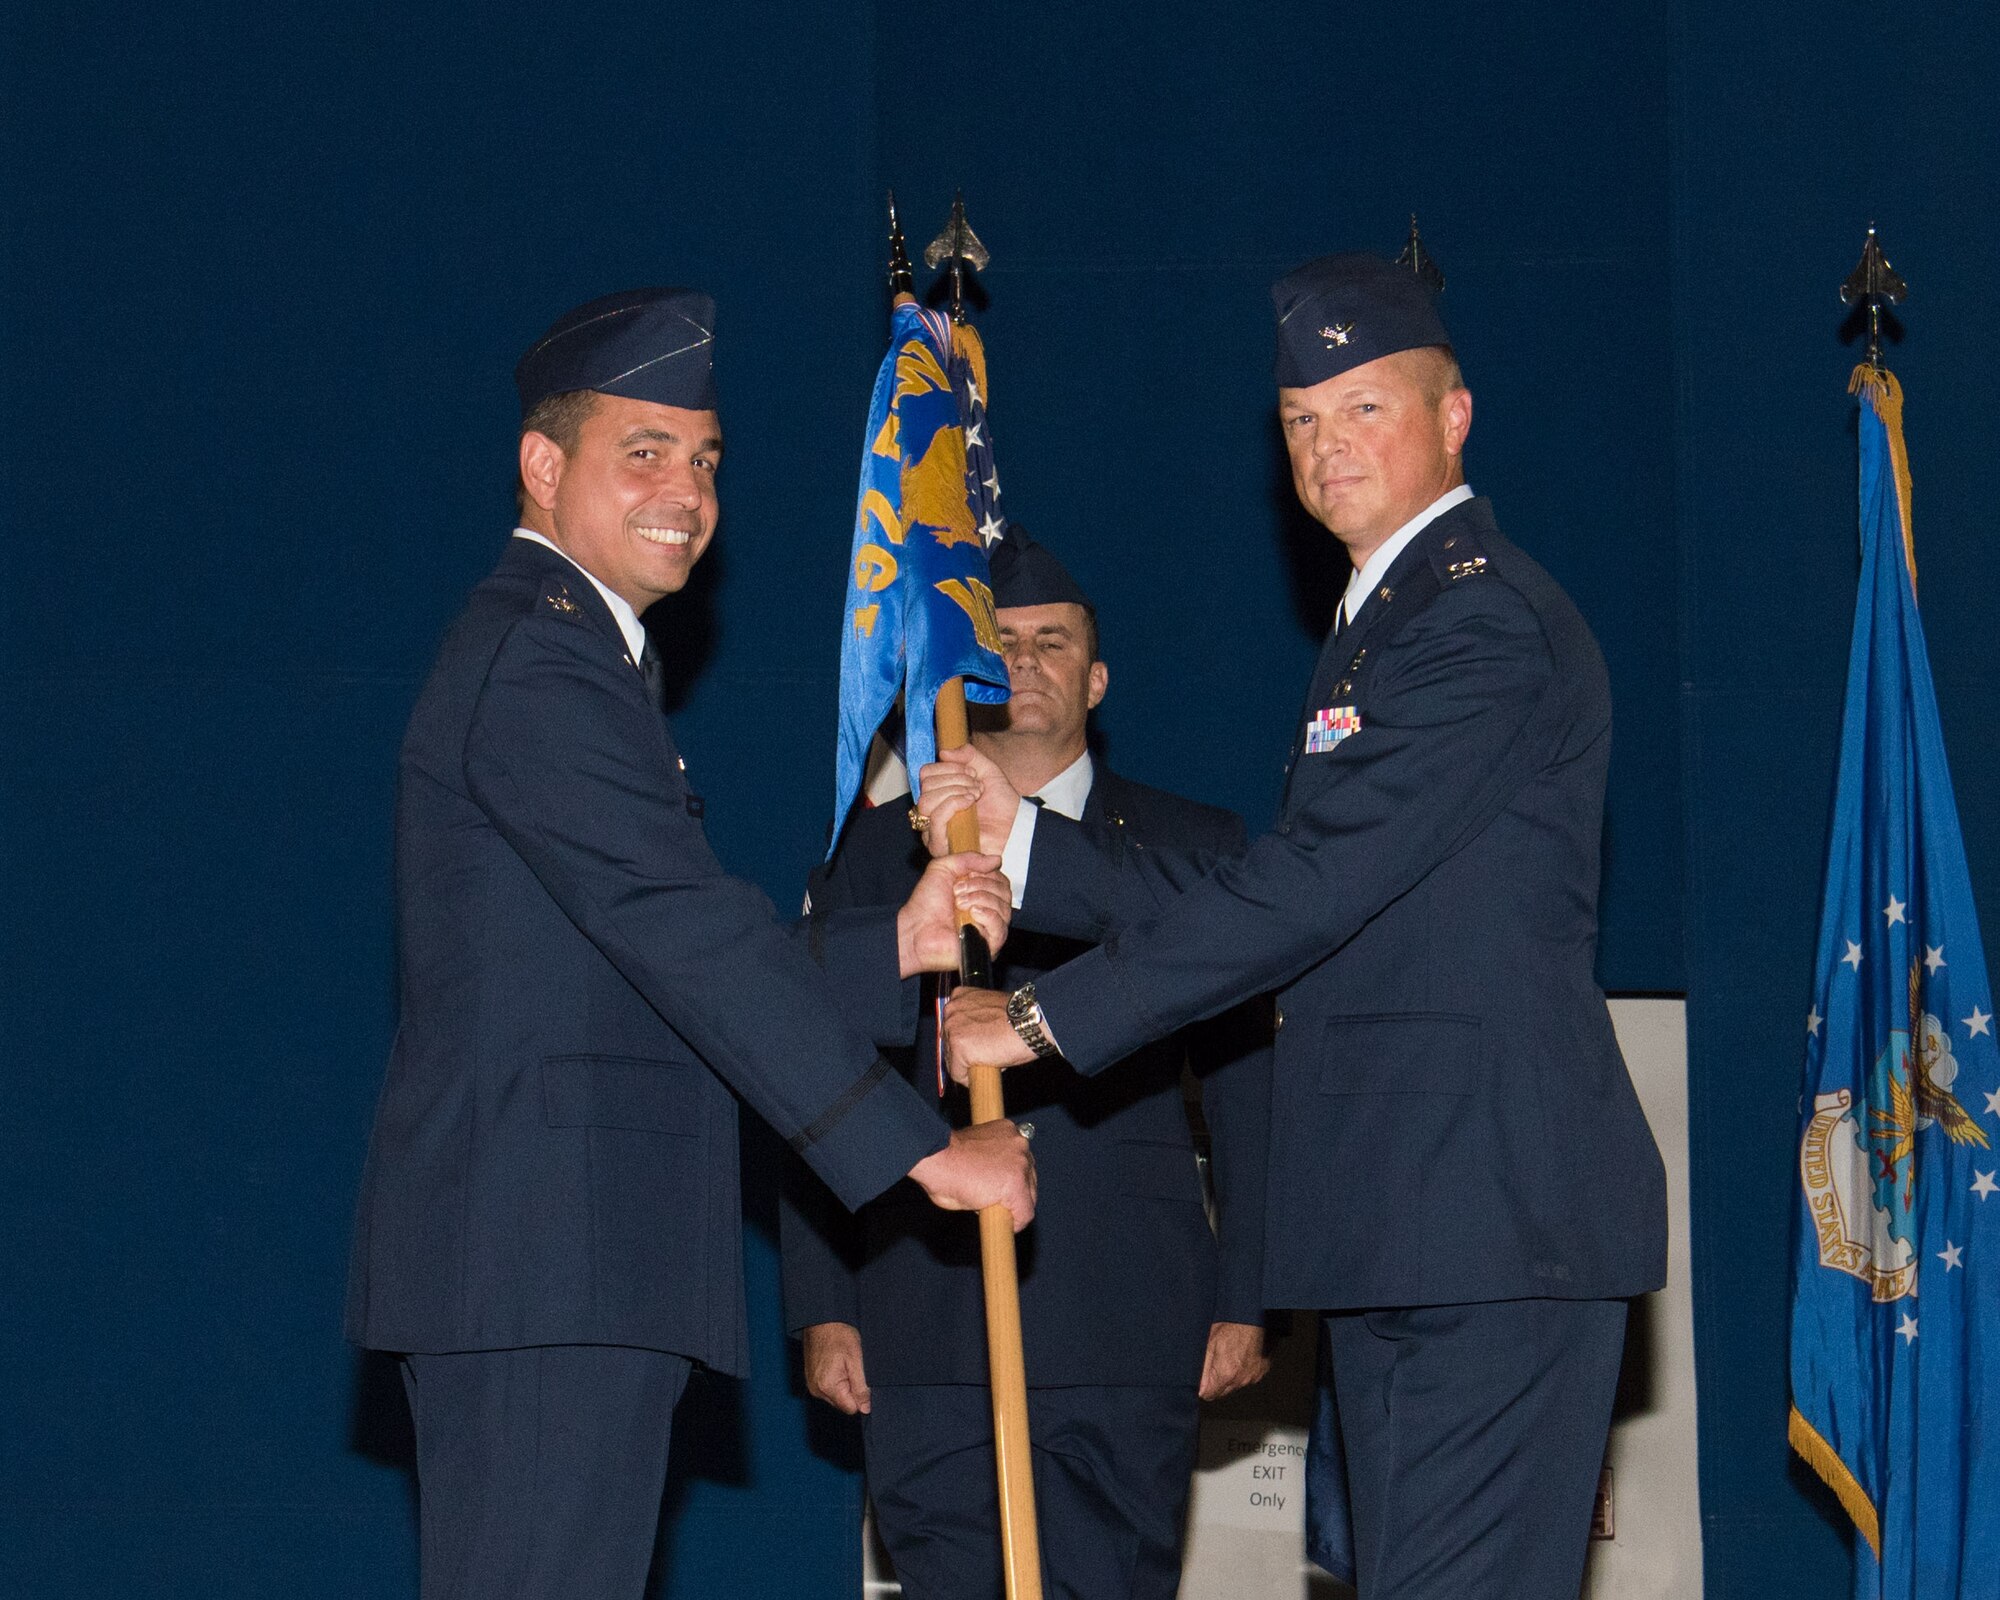 Lt. Col. Jason R. Price is promoted to the rank of colonel.